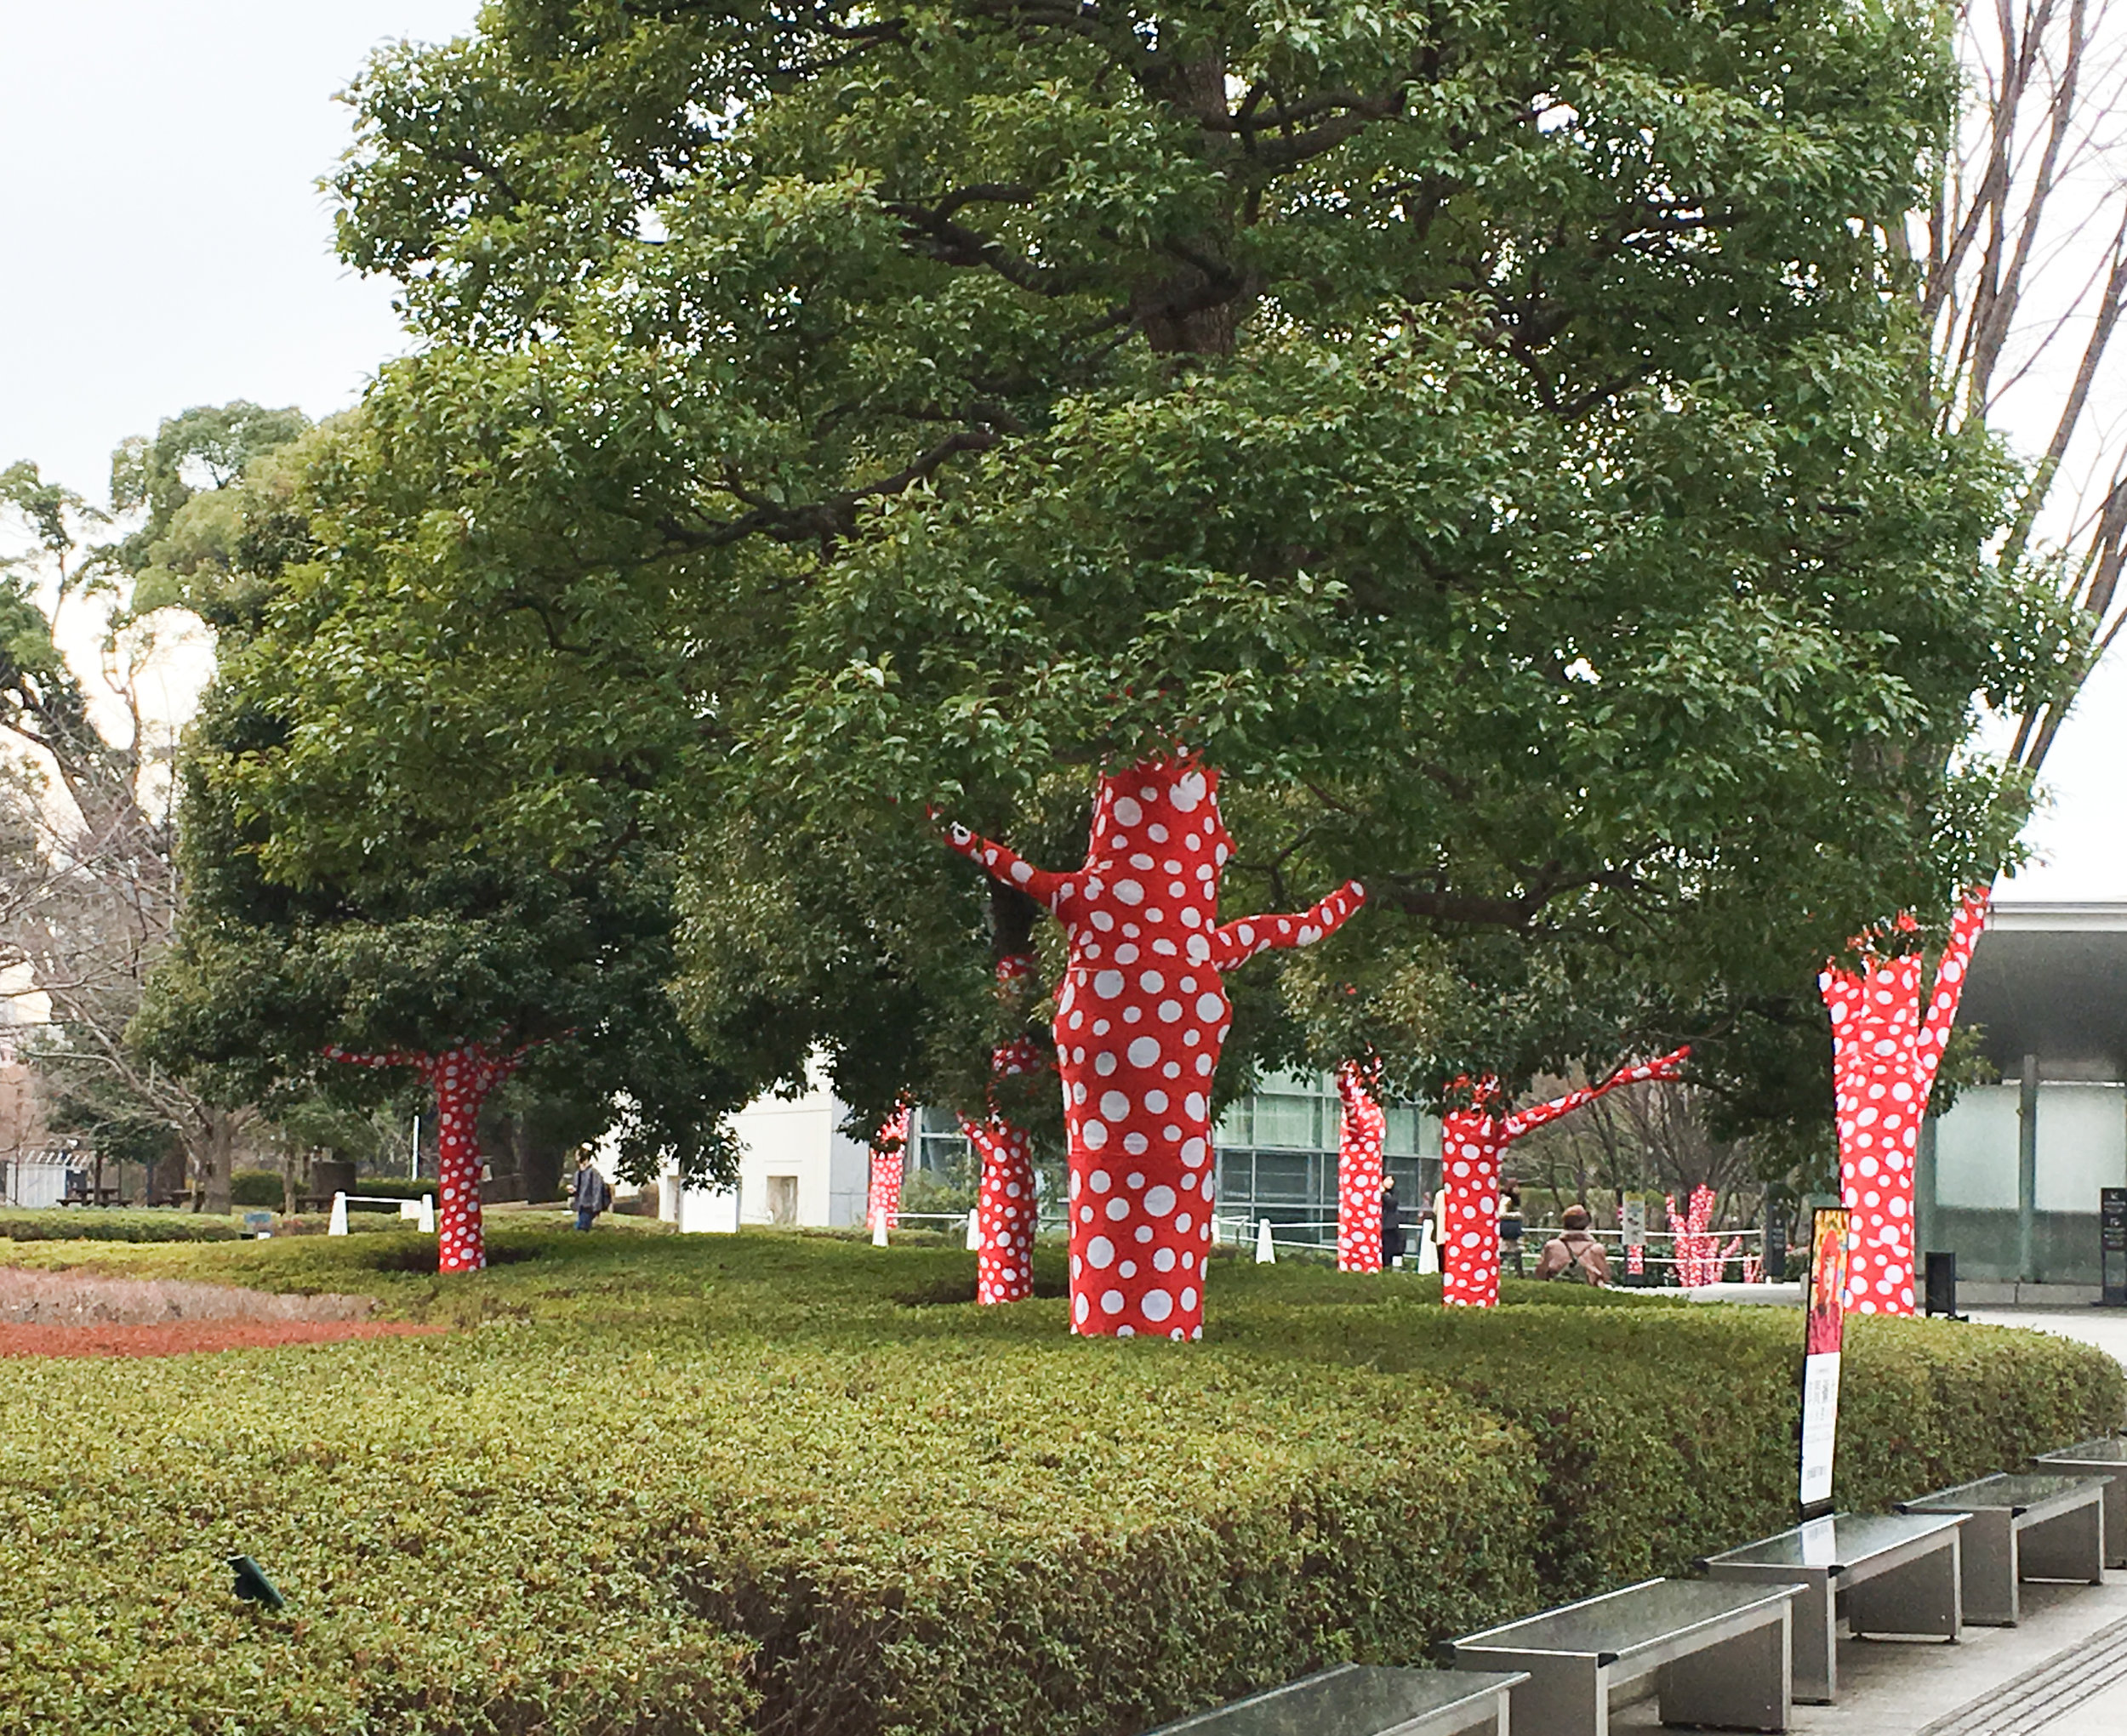 The tree outside of the Gallery wrapped in red and white polka-dots